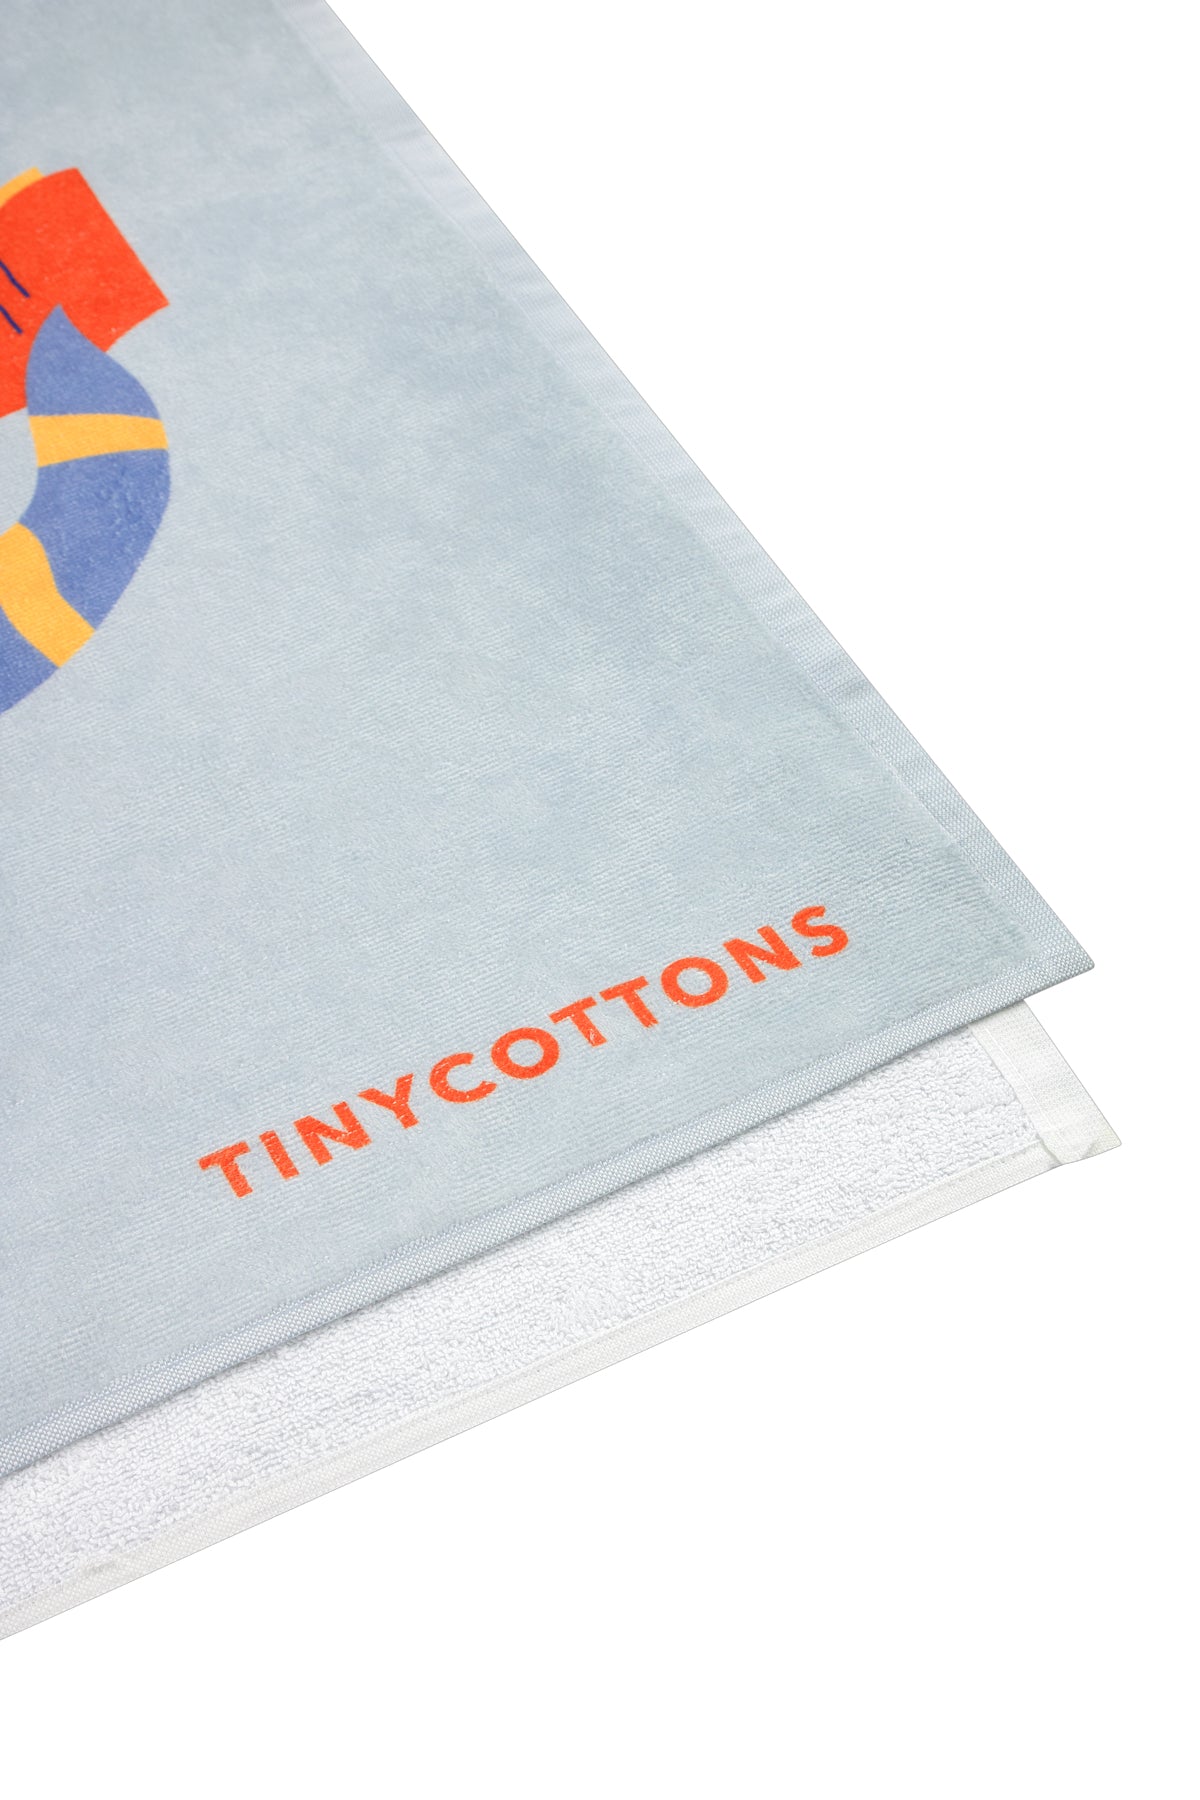 Tinycottons Leisure Towel